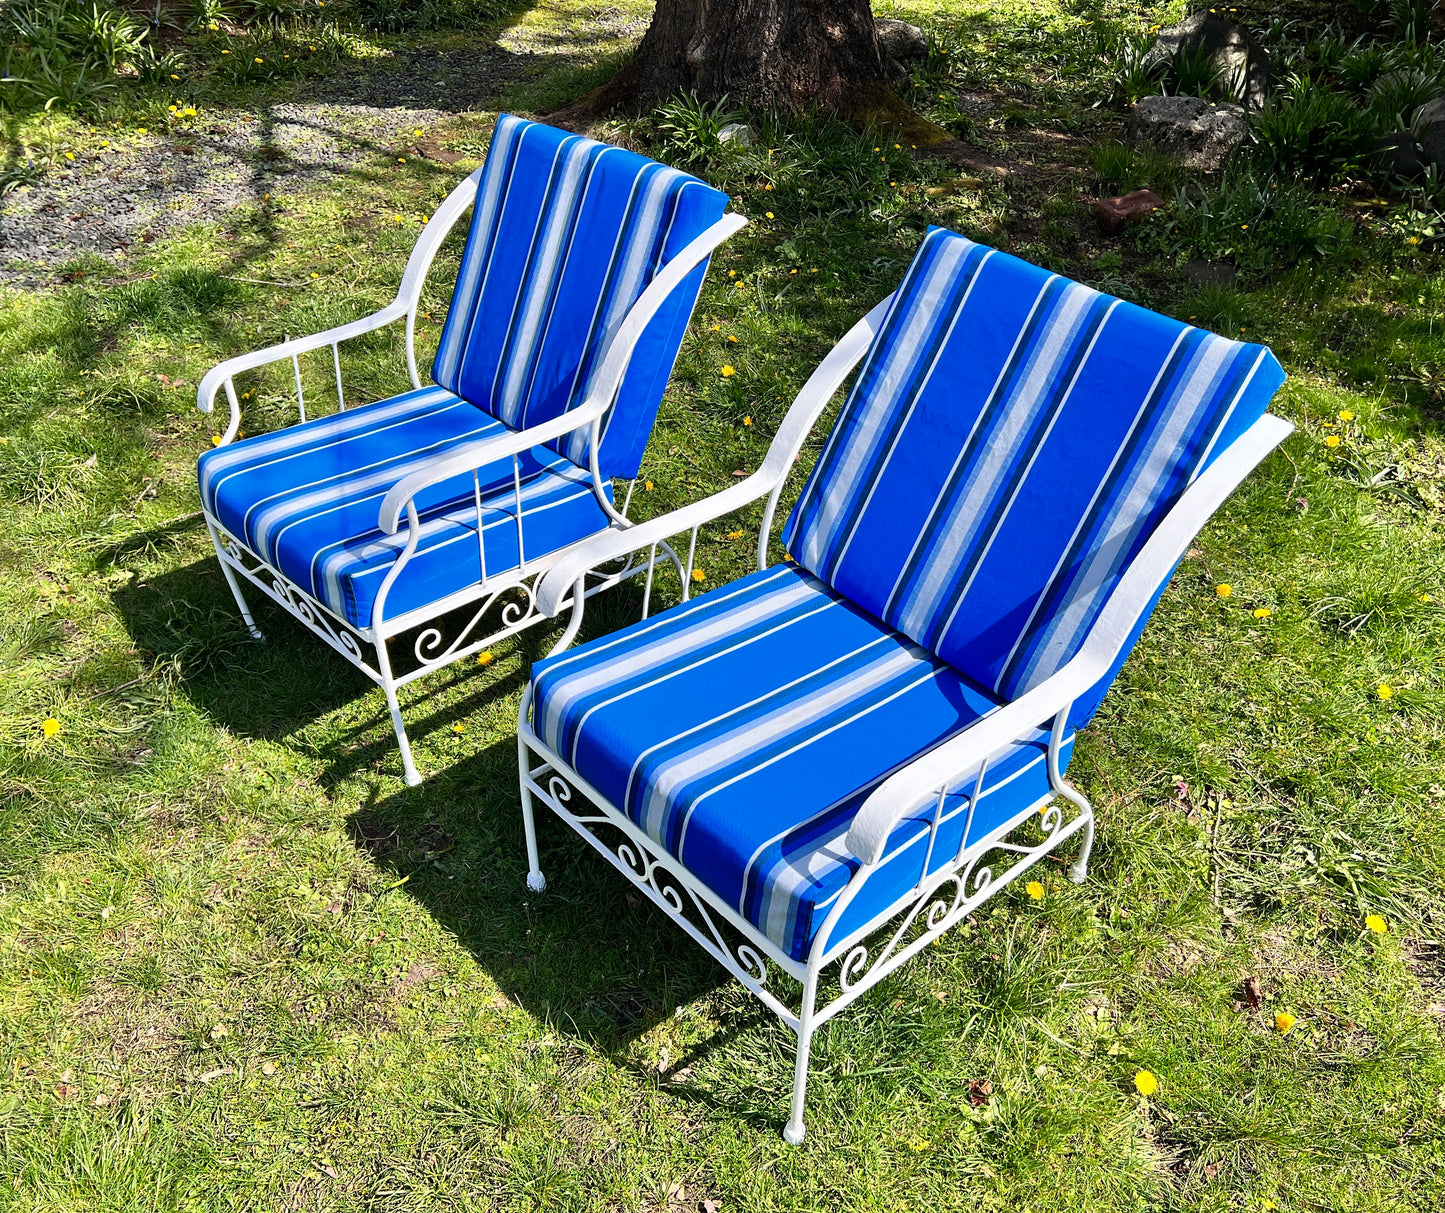 Midcentury 60s White Metal Patio Garden Chairs with blue and white striped upholstered cushions